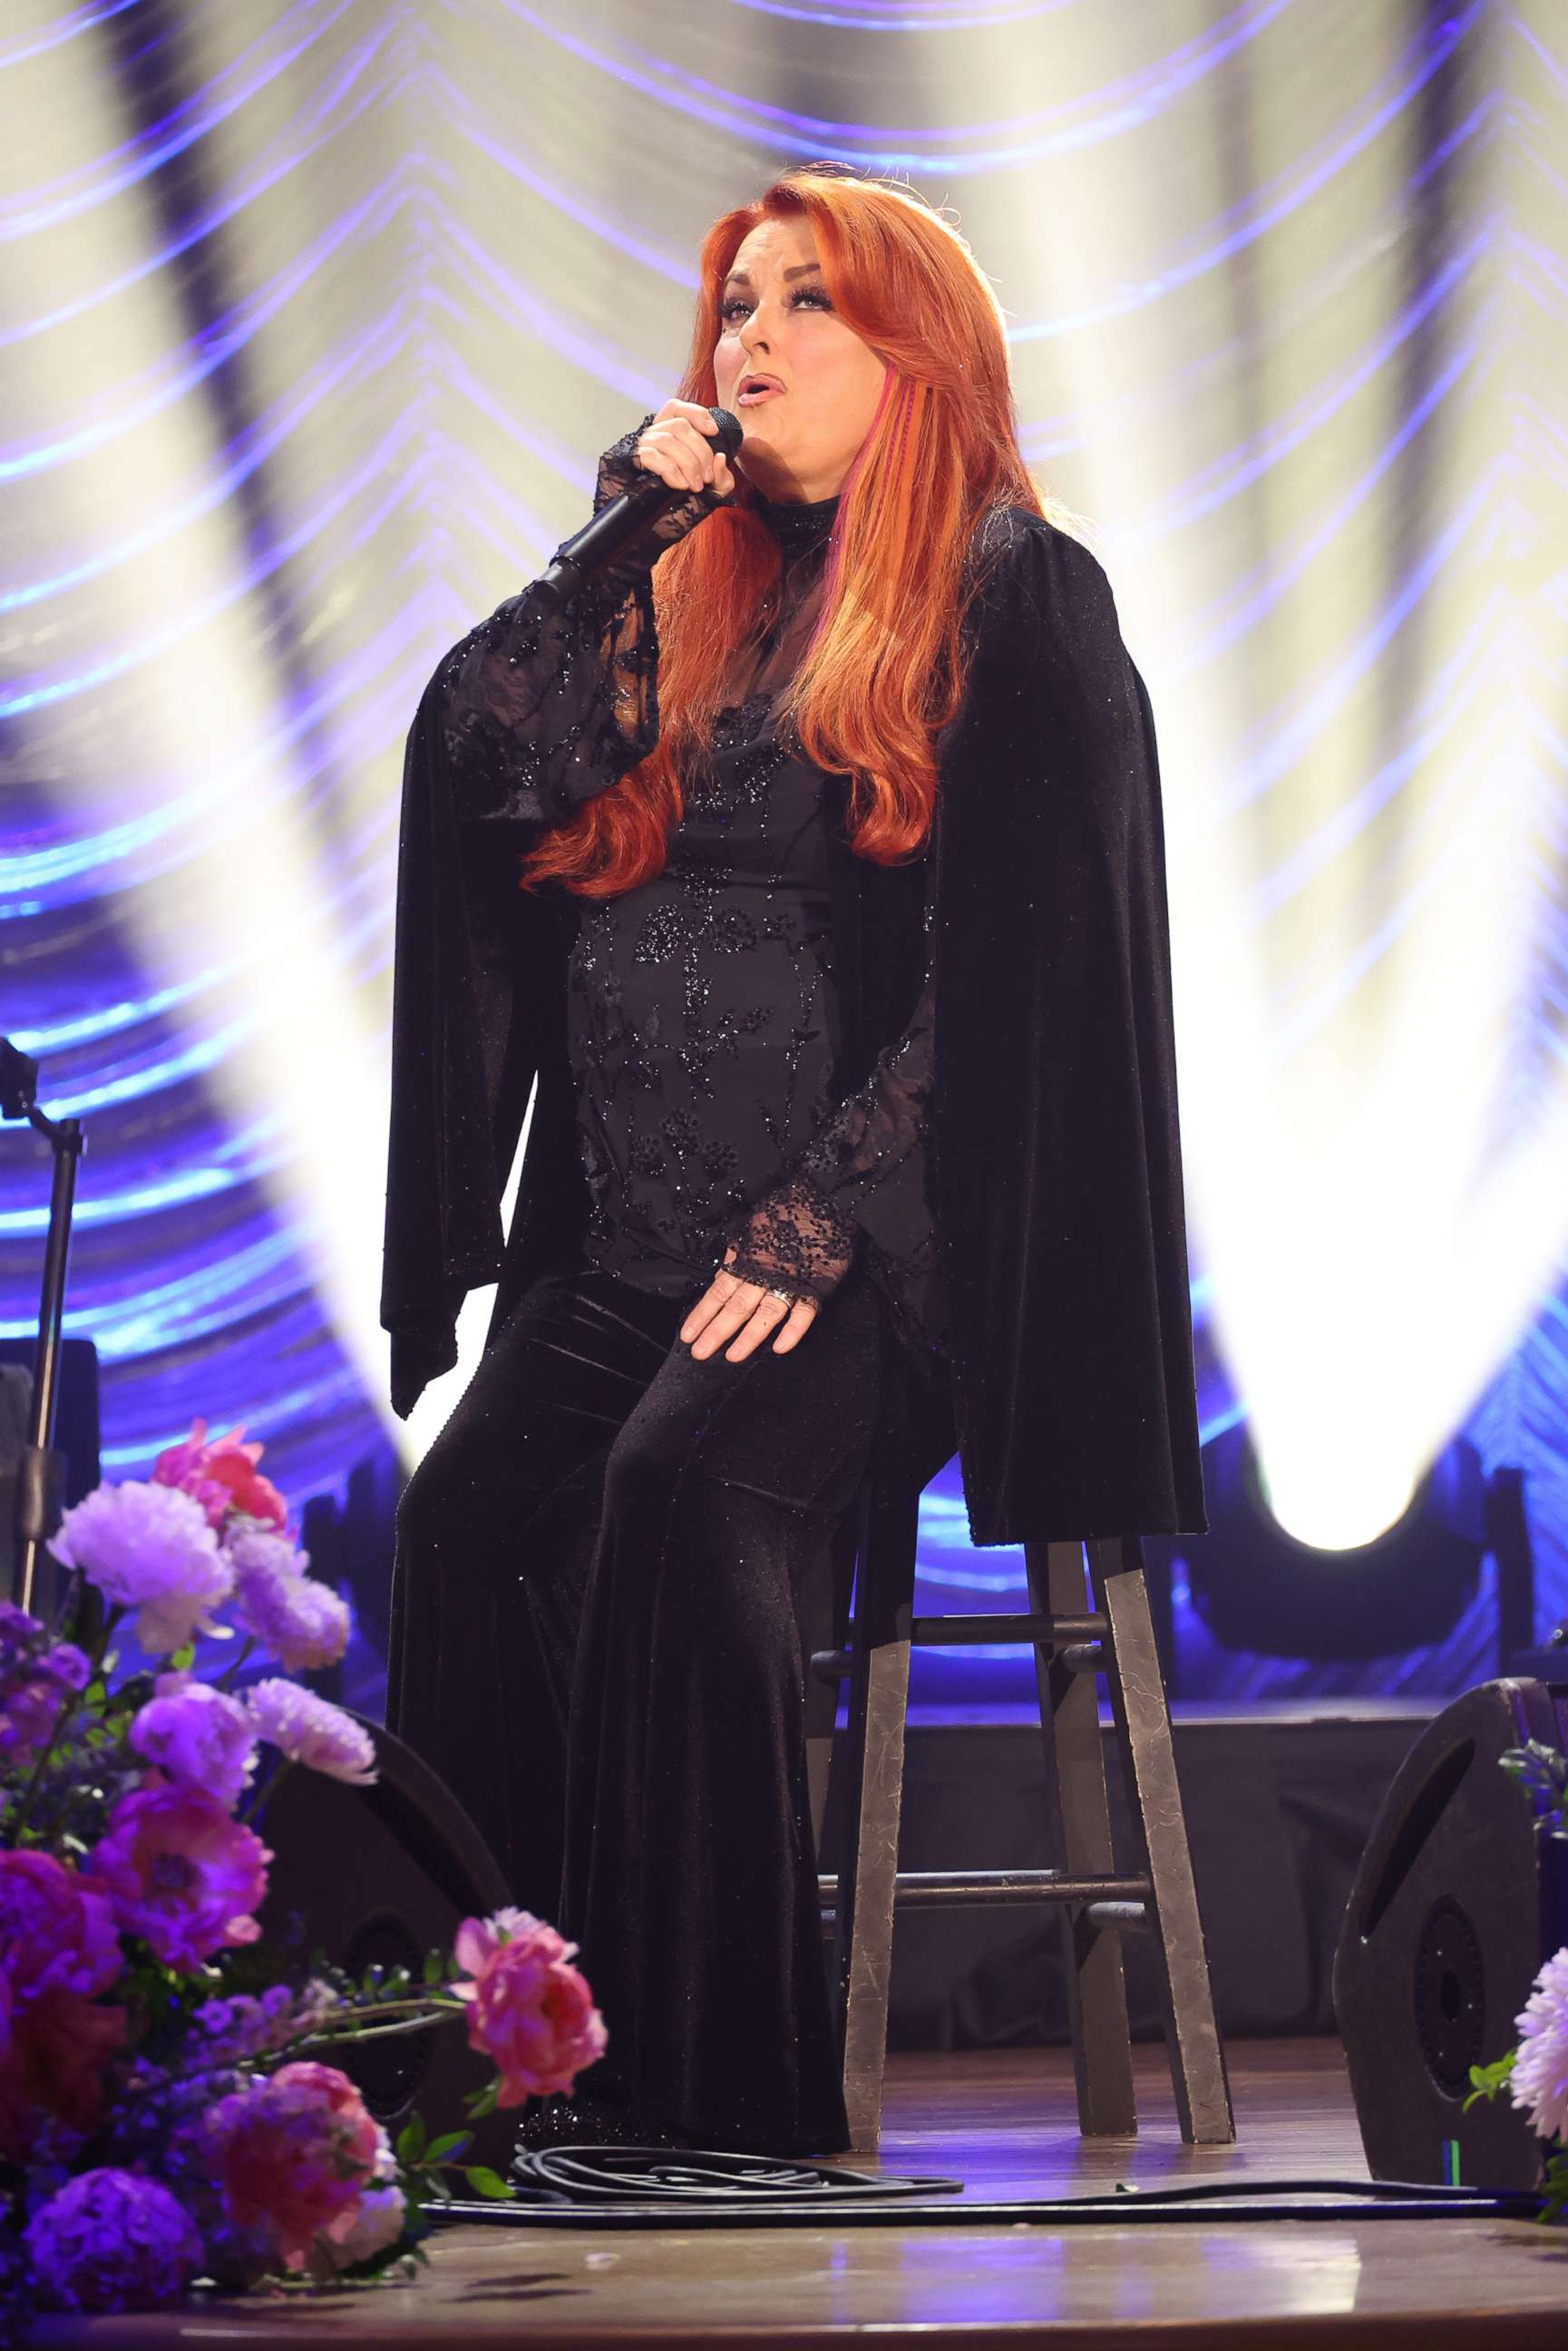 PHOTO: Wynonna Judd performs onstage during CMT and Sandbox Live's "Naomi Judd: A River Of Time Celebration" at Ryman Auditorium on May 15, 2022 in Nashville, Tenn.